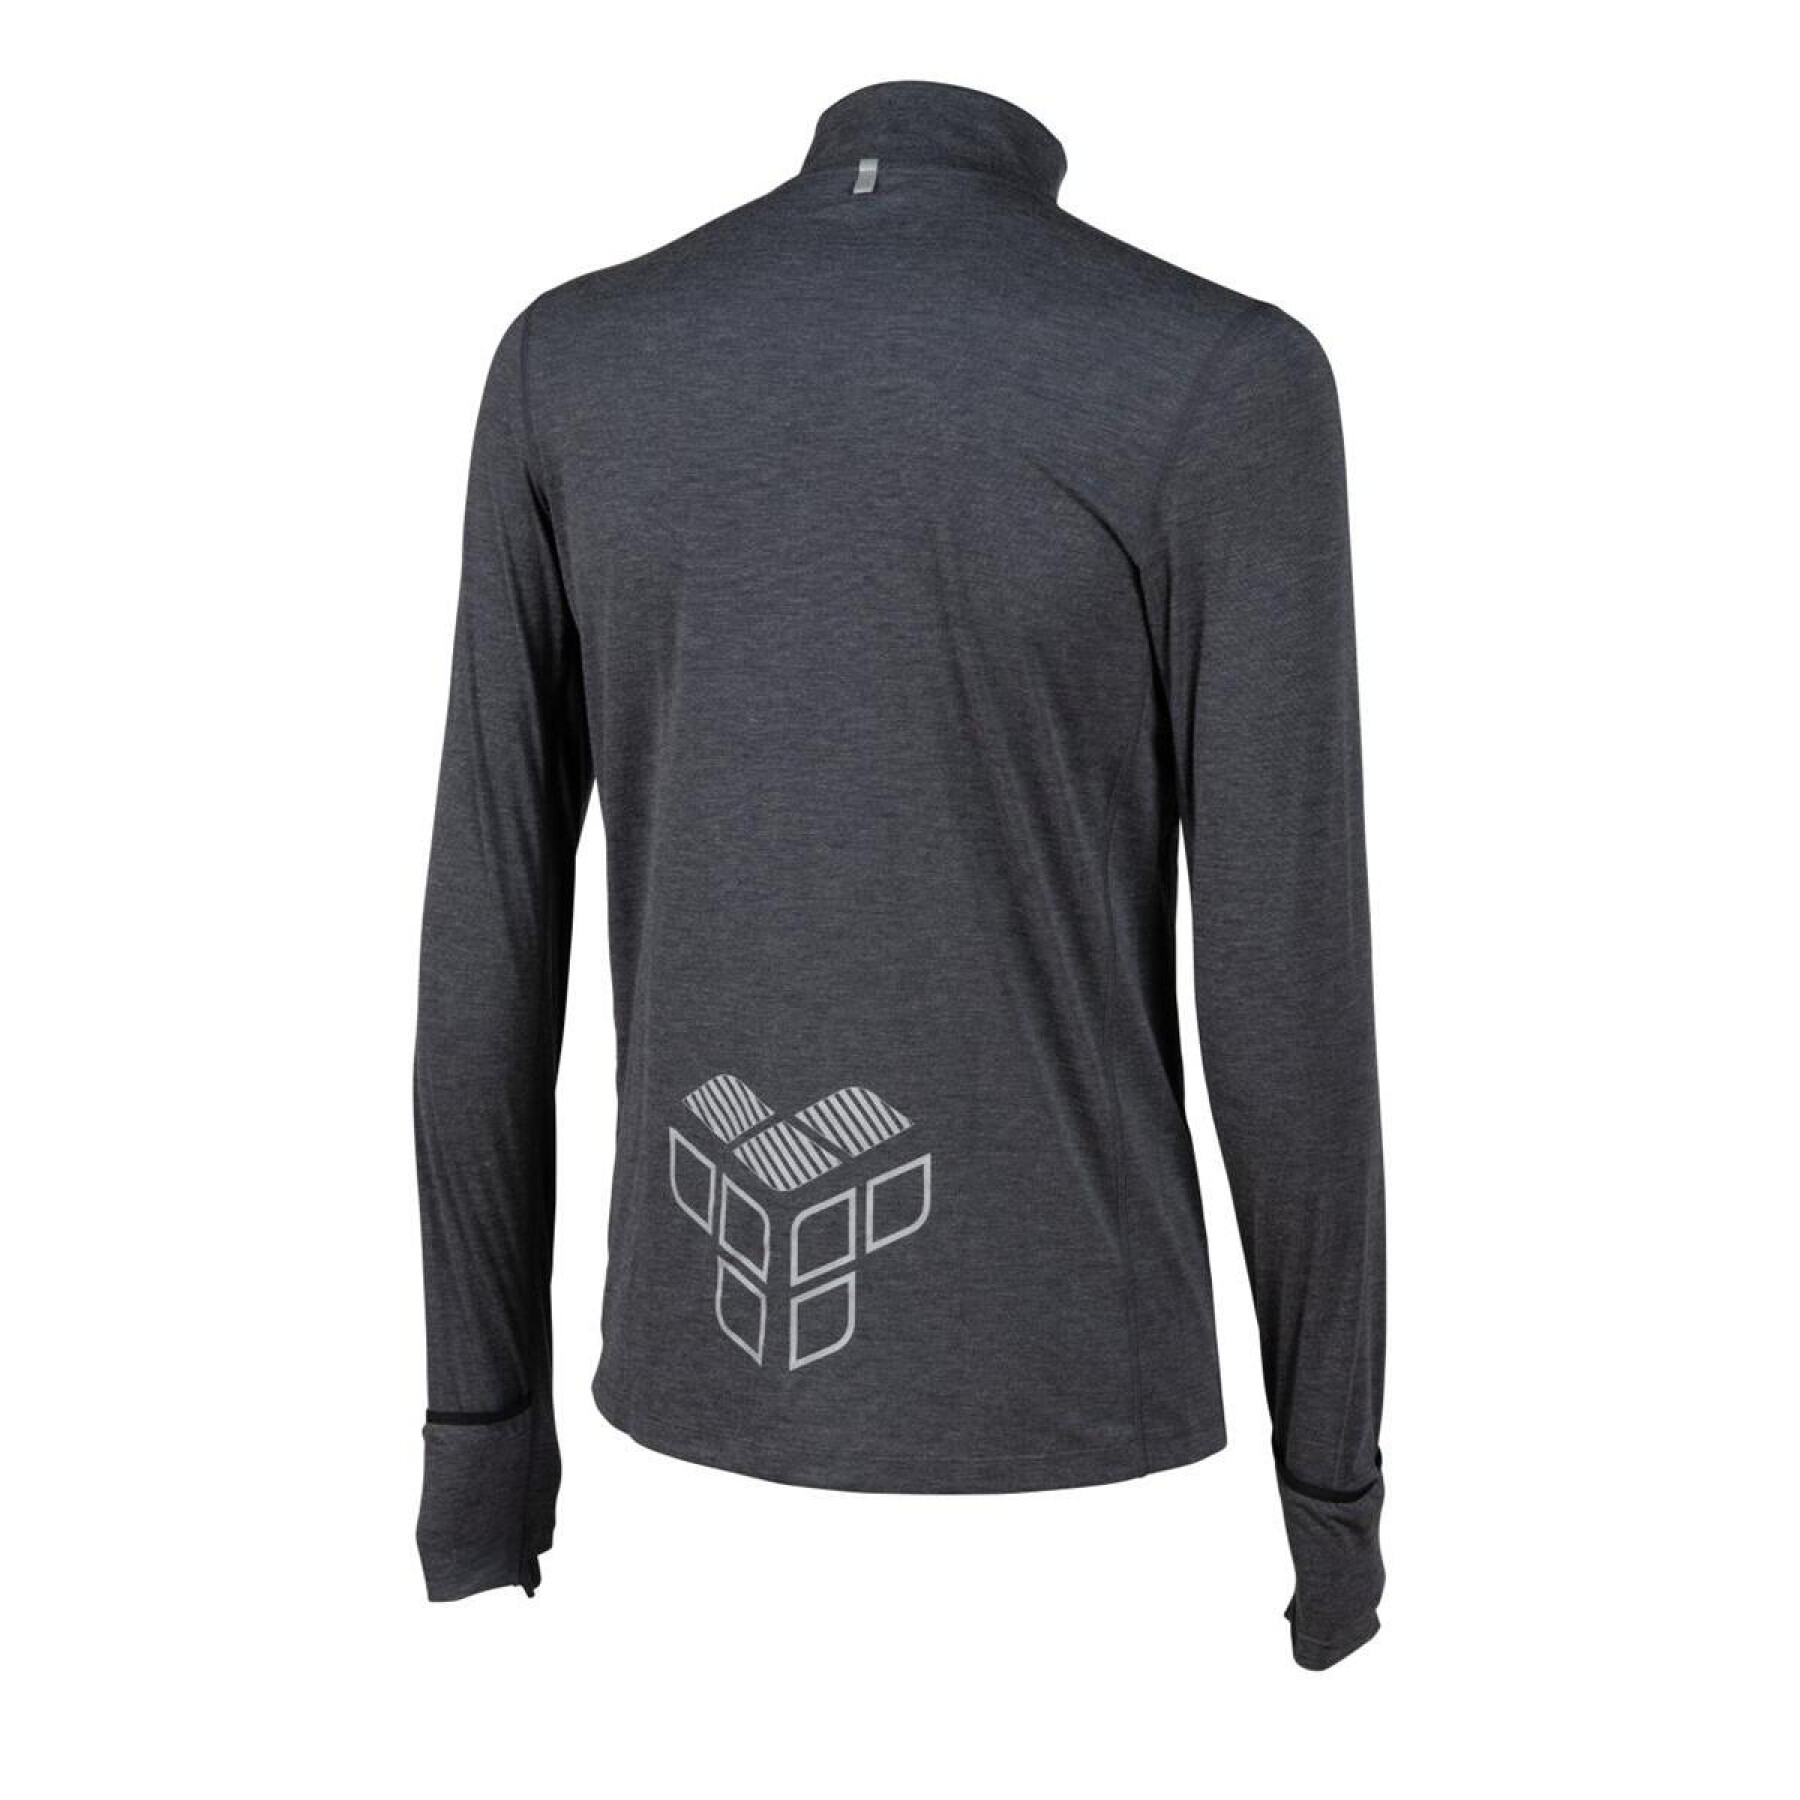 T-shirt manches longues demi-zip Arena Thermal